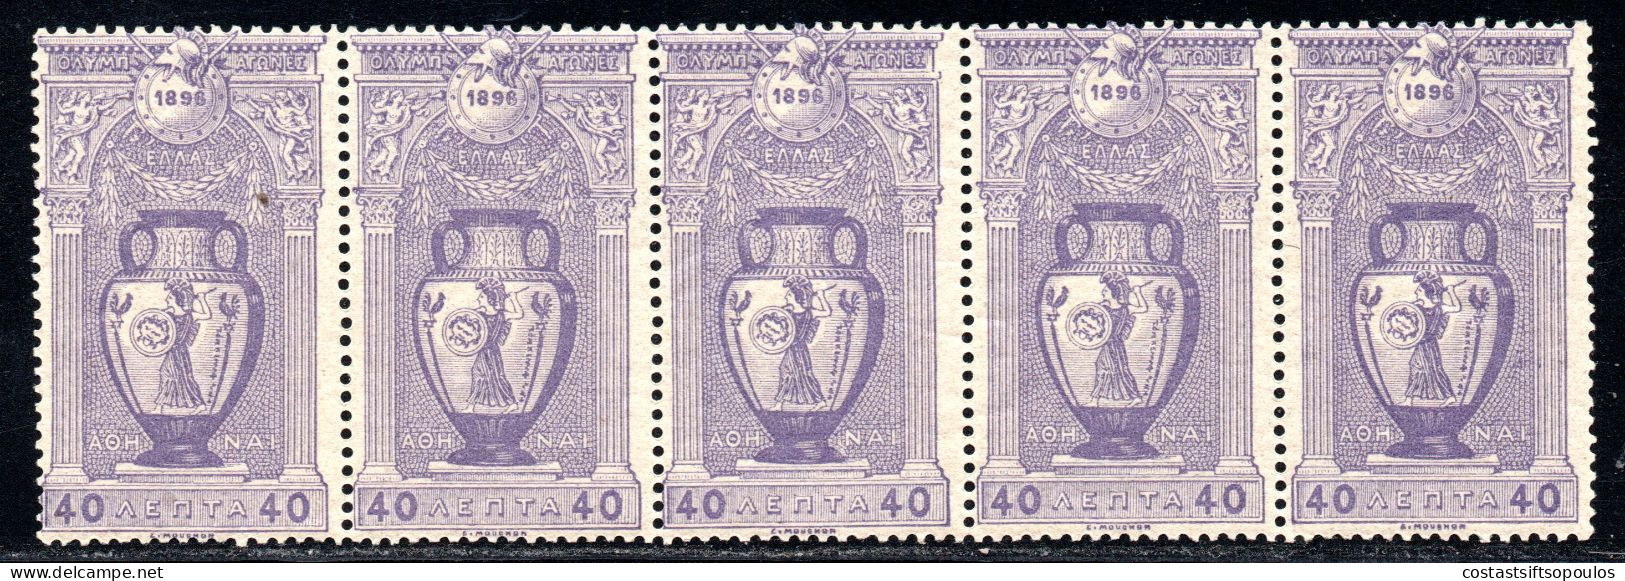 1544.GREECE.1896 OLYMPIC GAMES.40L.VASE,PALLA ATHENA,SC.123,HELLAS115 MNH STRIP OF 5,VERY FINE AND FRESH. - Unused Stamps